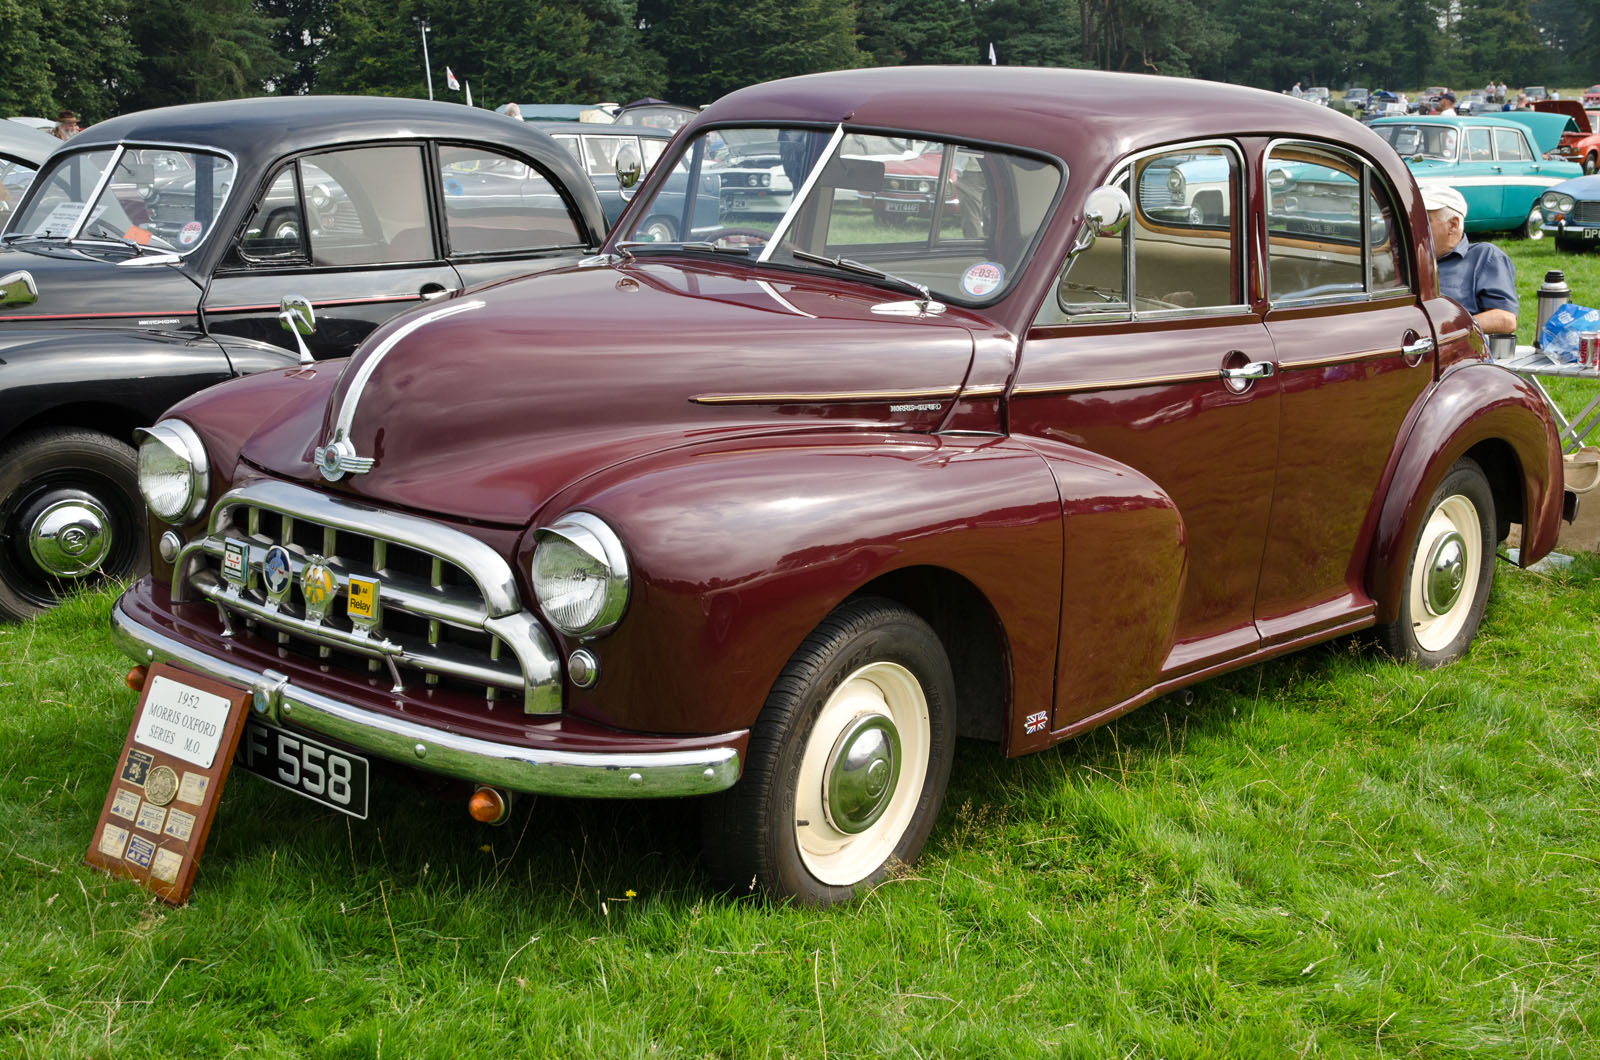 a vintage car on display at a classic car show